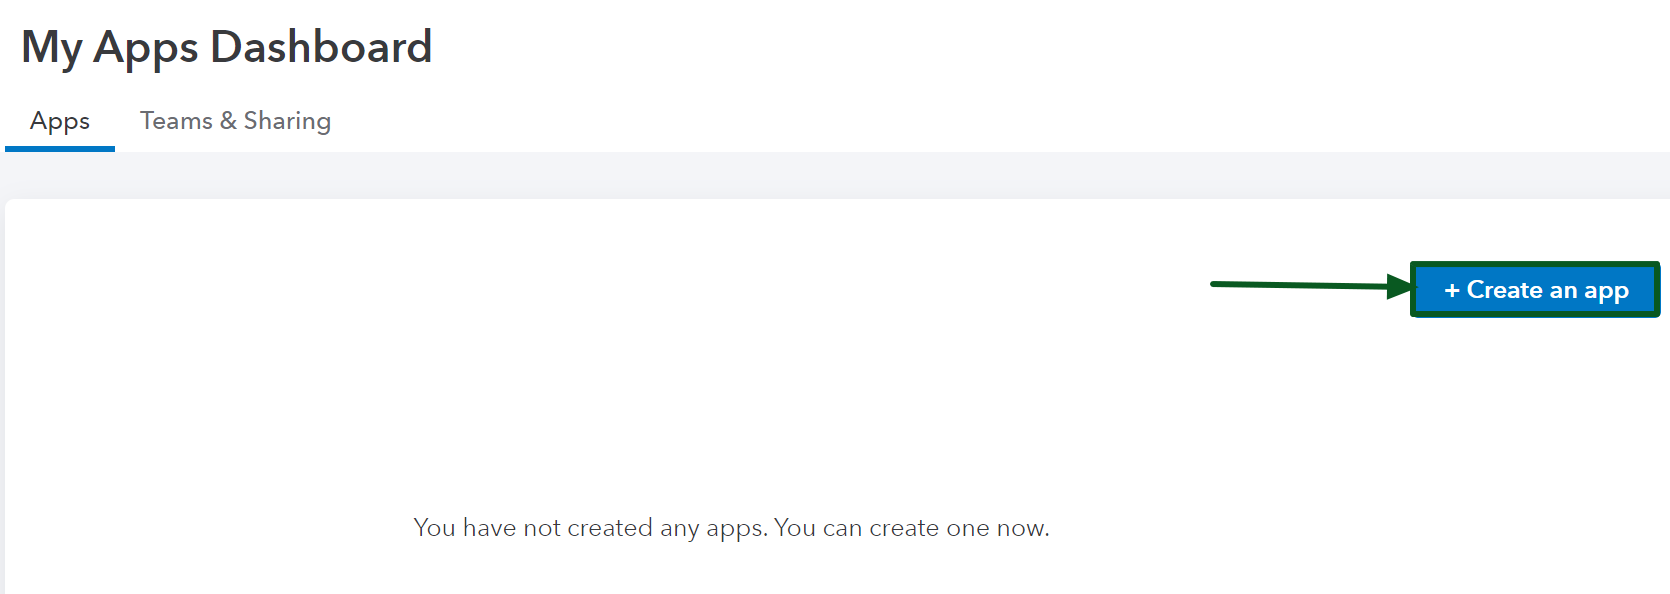 To access the Create an App option, you need to access the Dashboard.